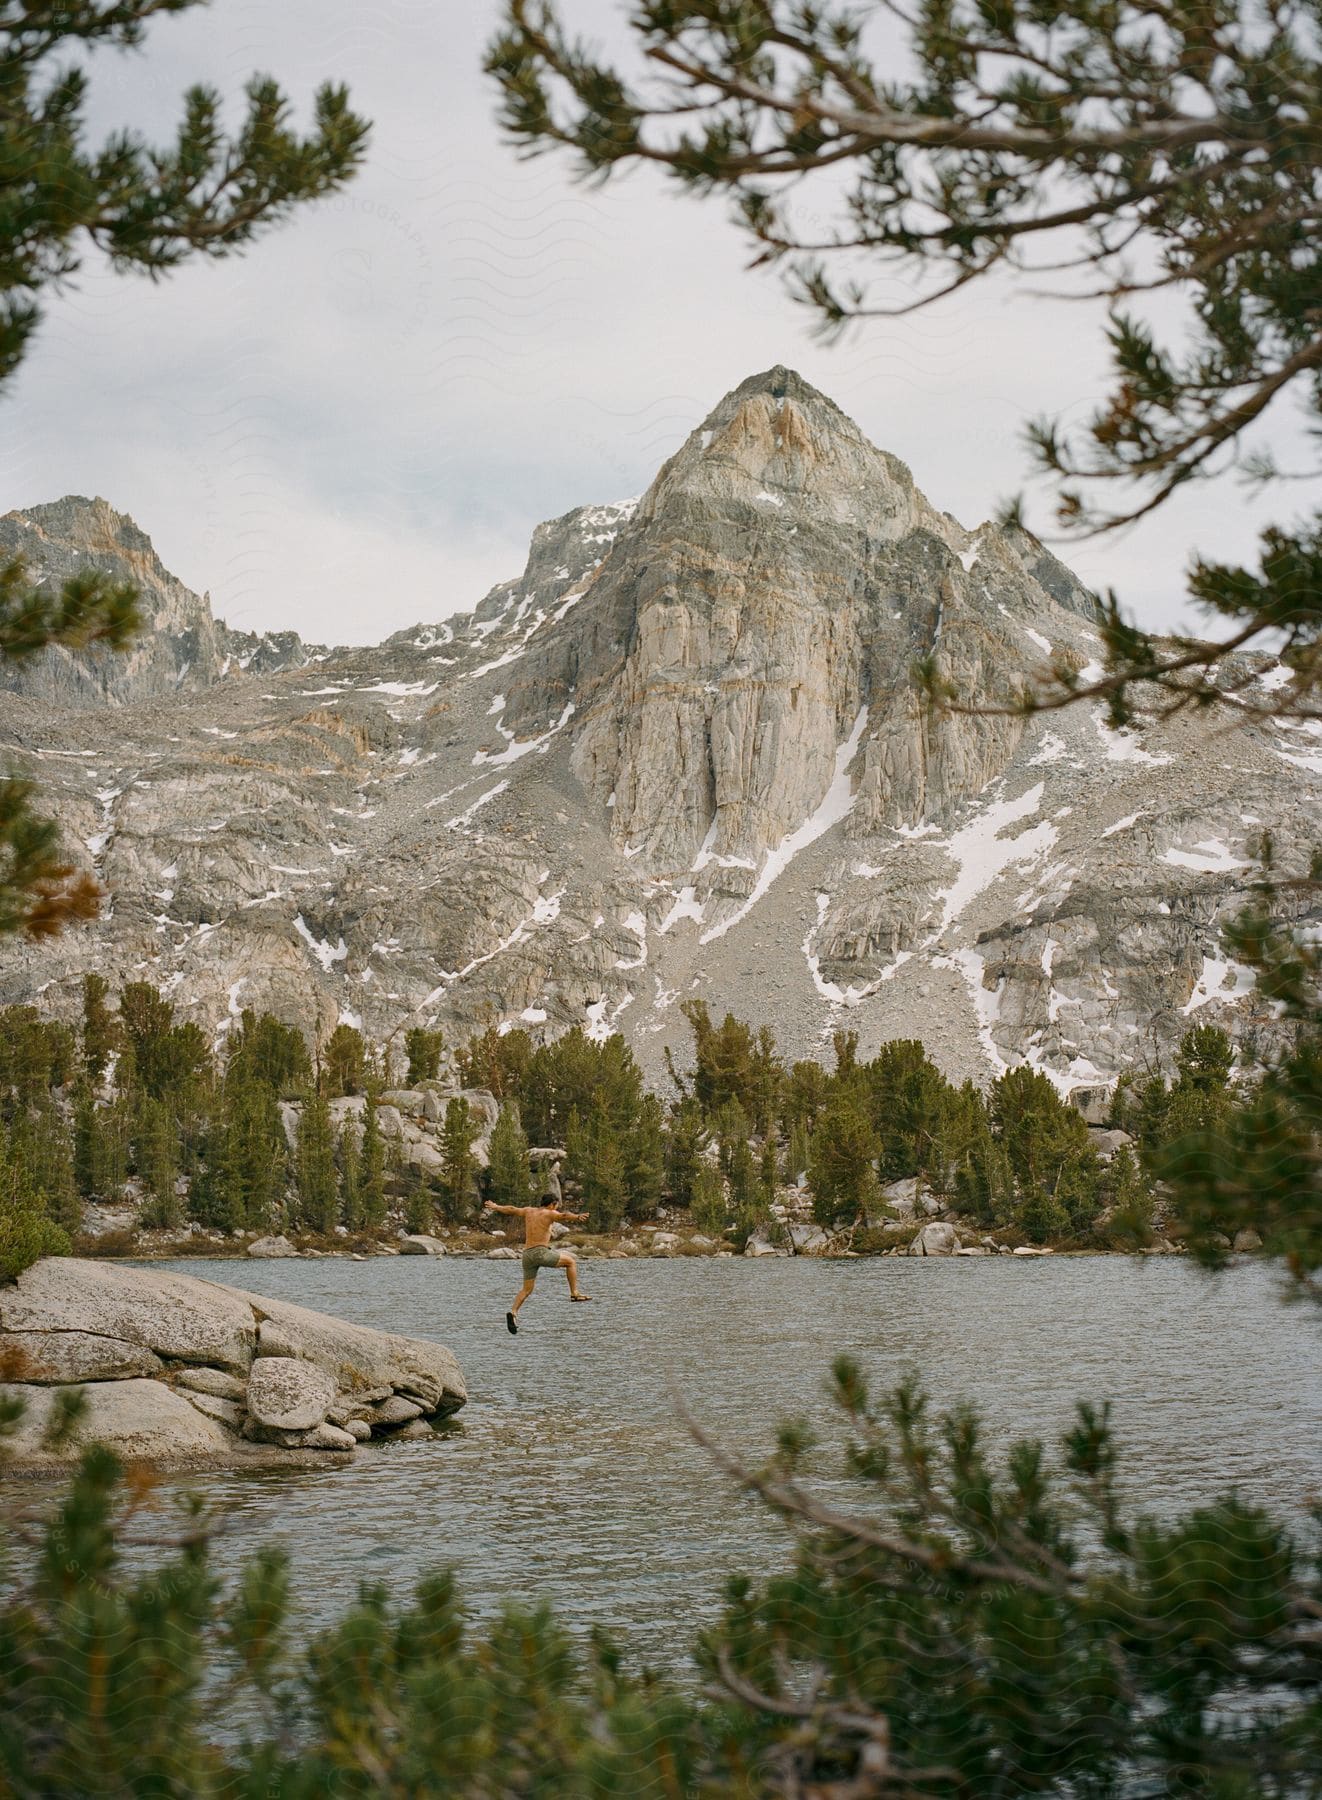 A man jumps into a serene lake surrounded by trees and rocks with a tall mountain in the backdrop